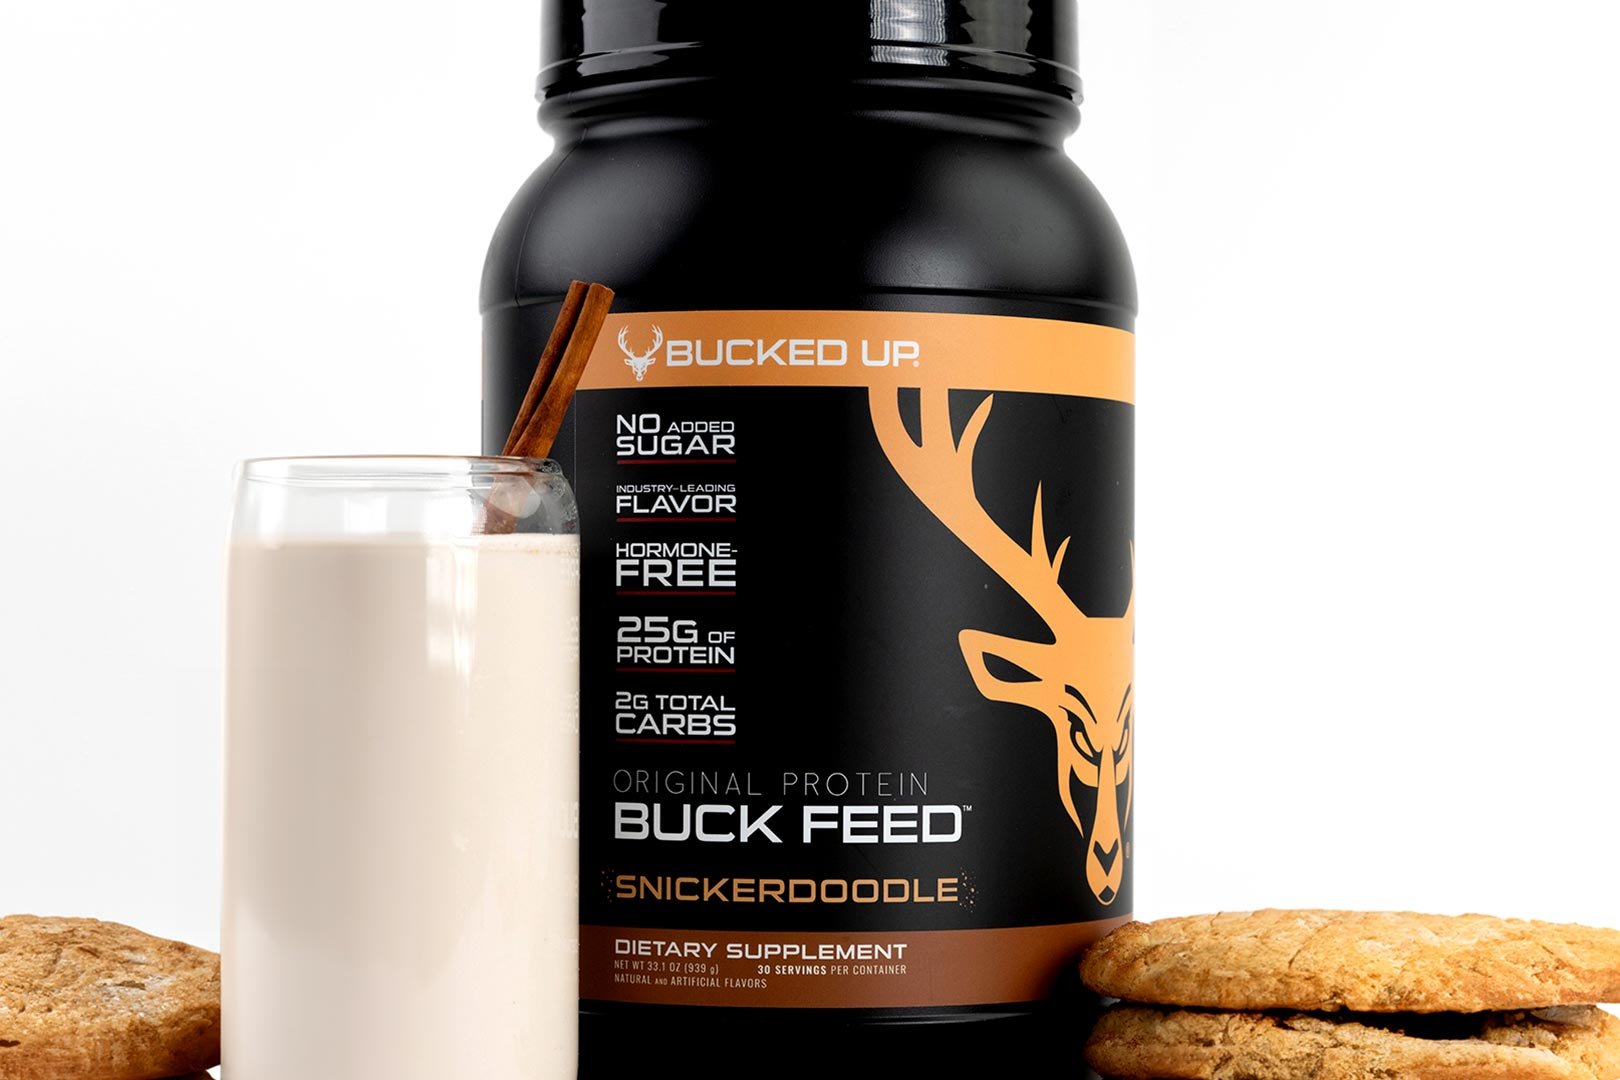 Bucked Up Snickerdoodle Buck Feed Protein Powder